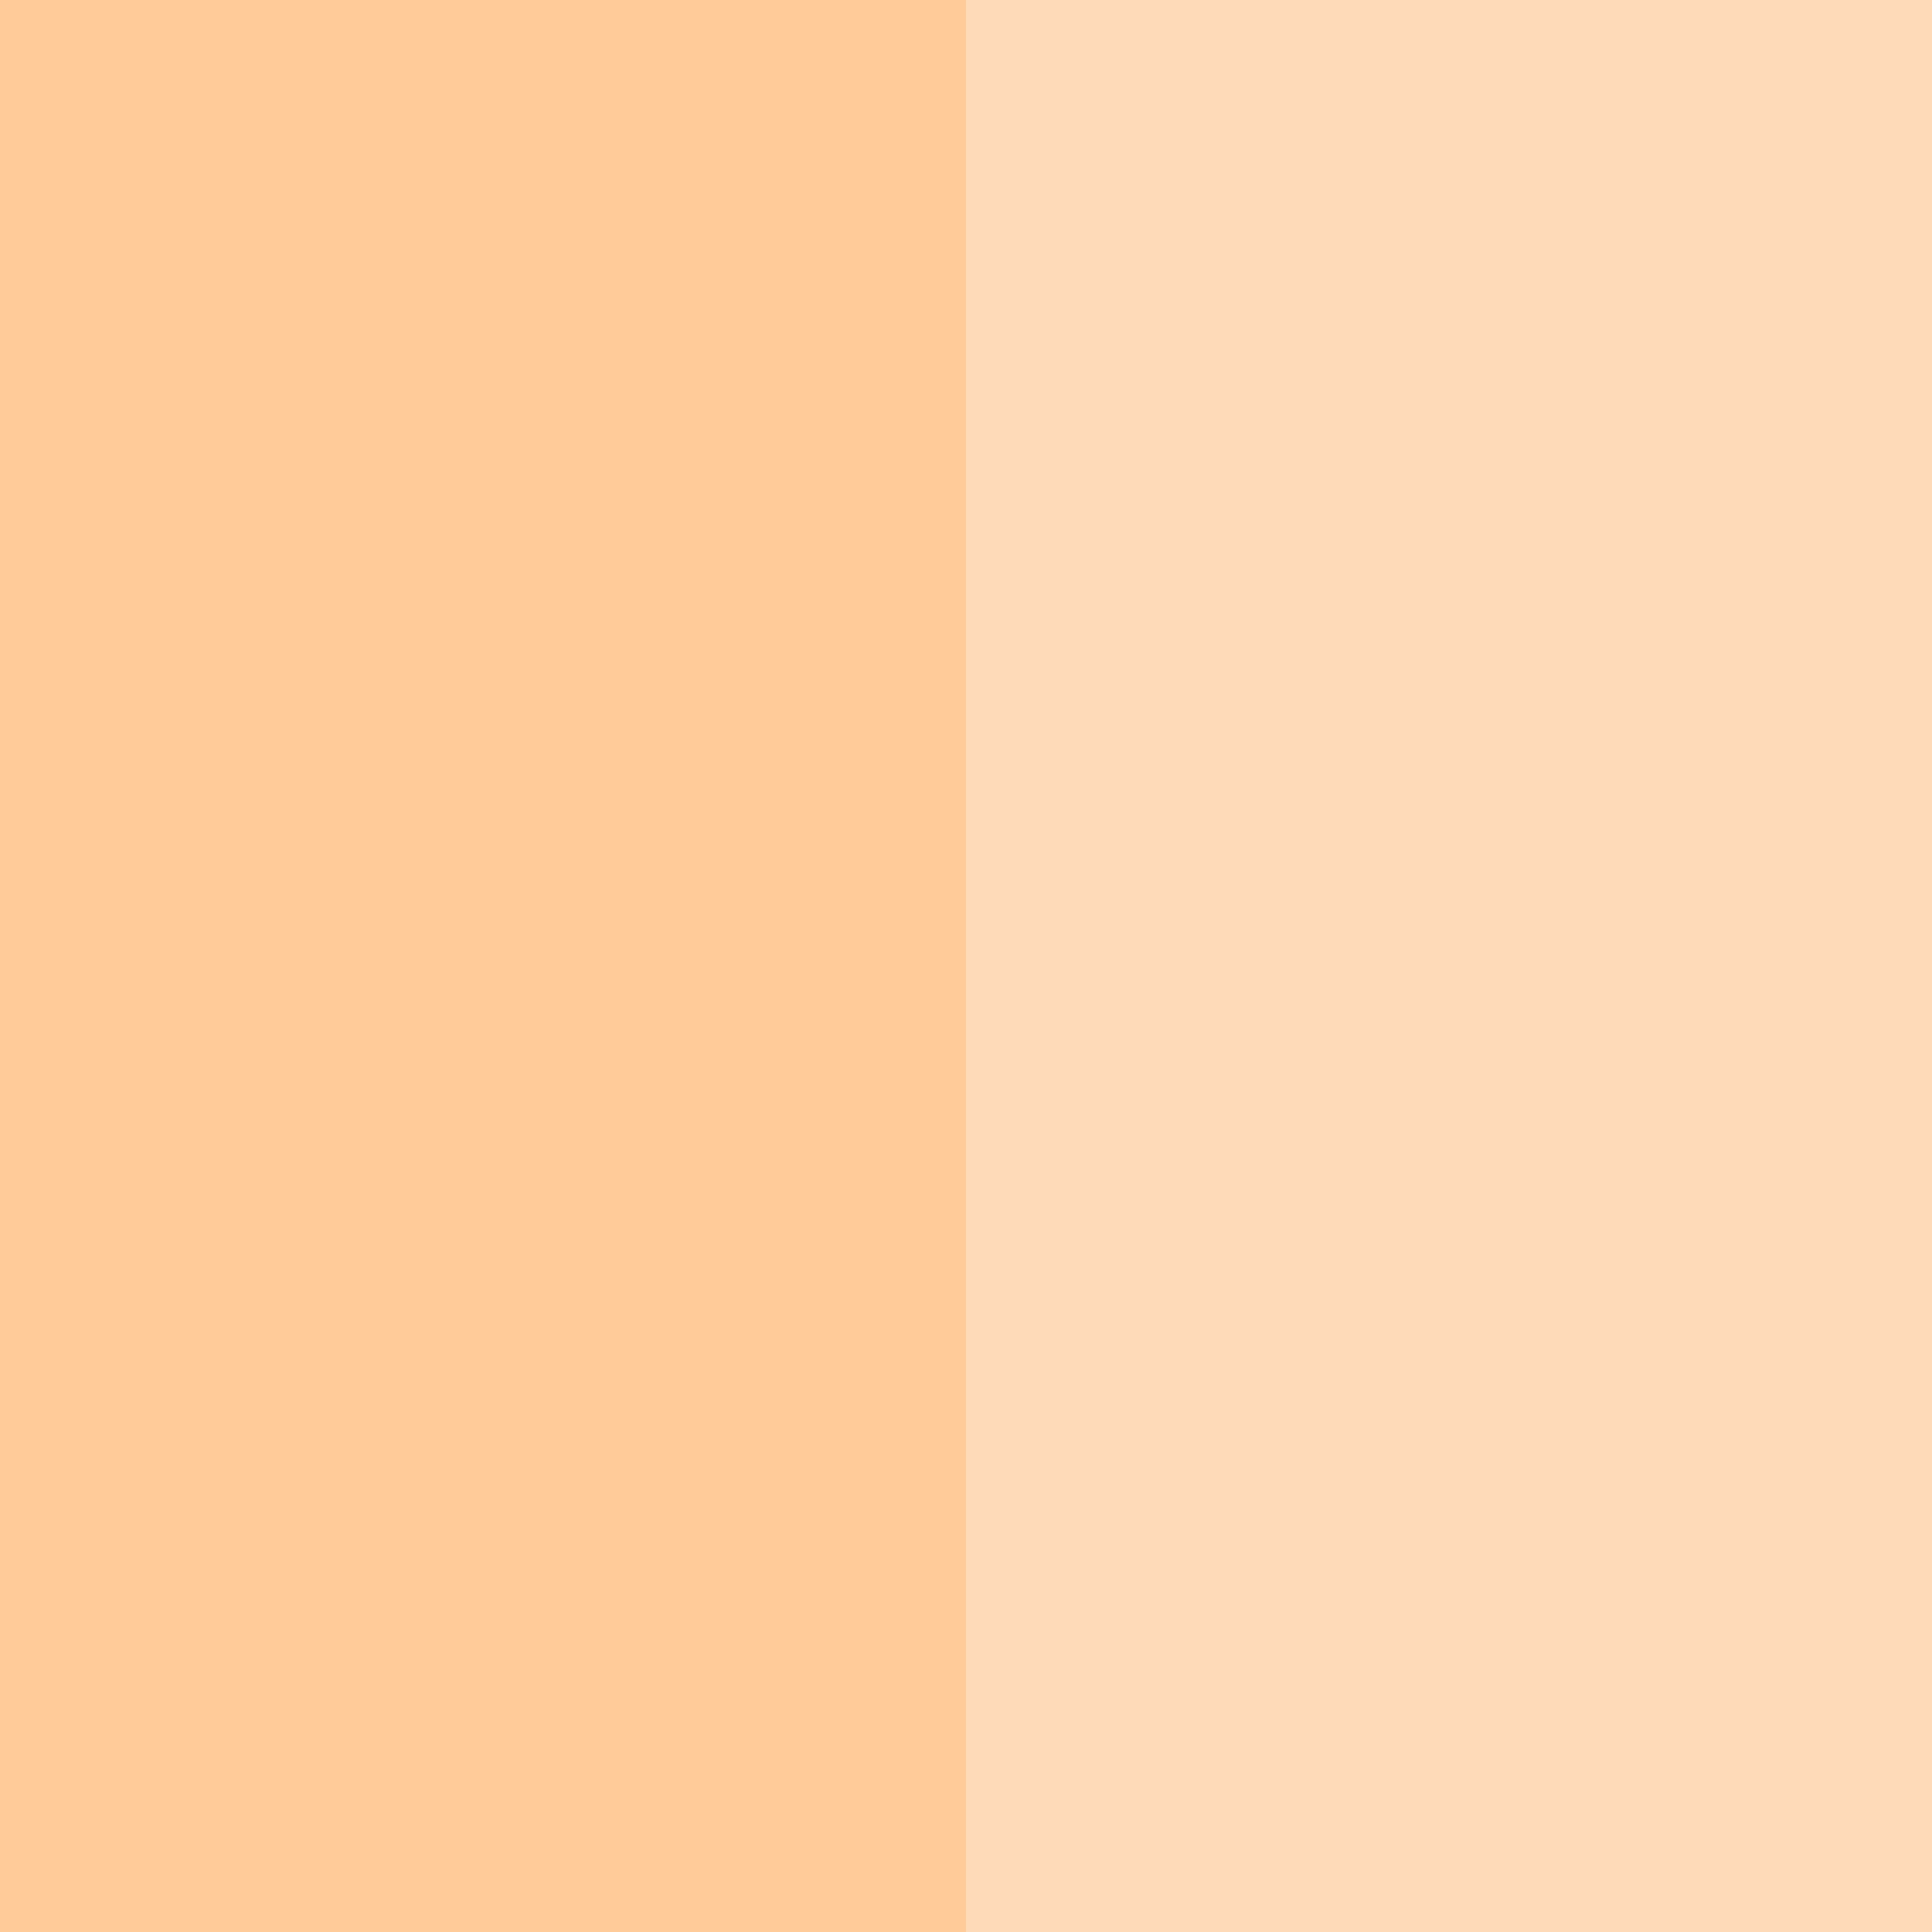 Resolution Peach Orange And Puff Solid Two Color Background